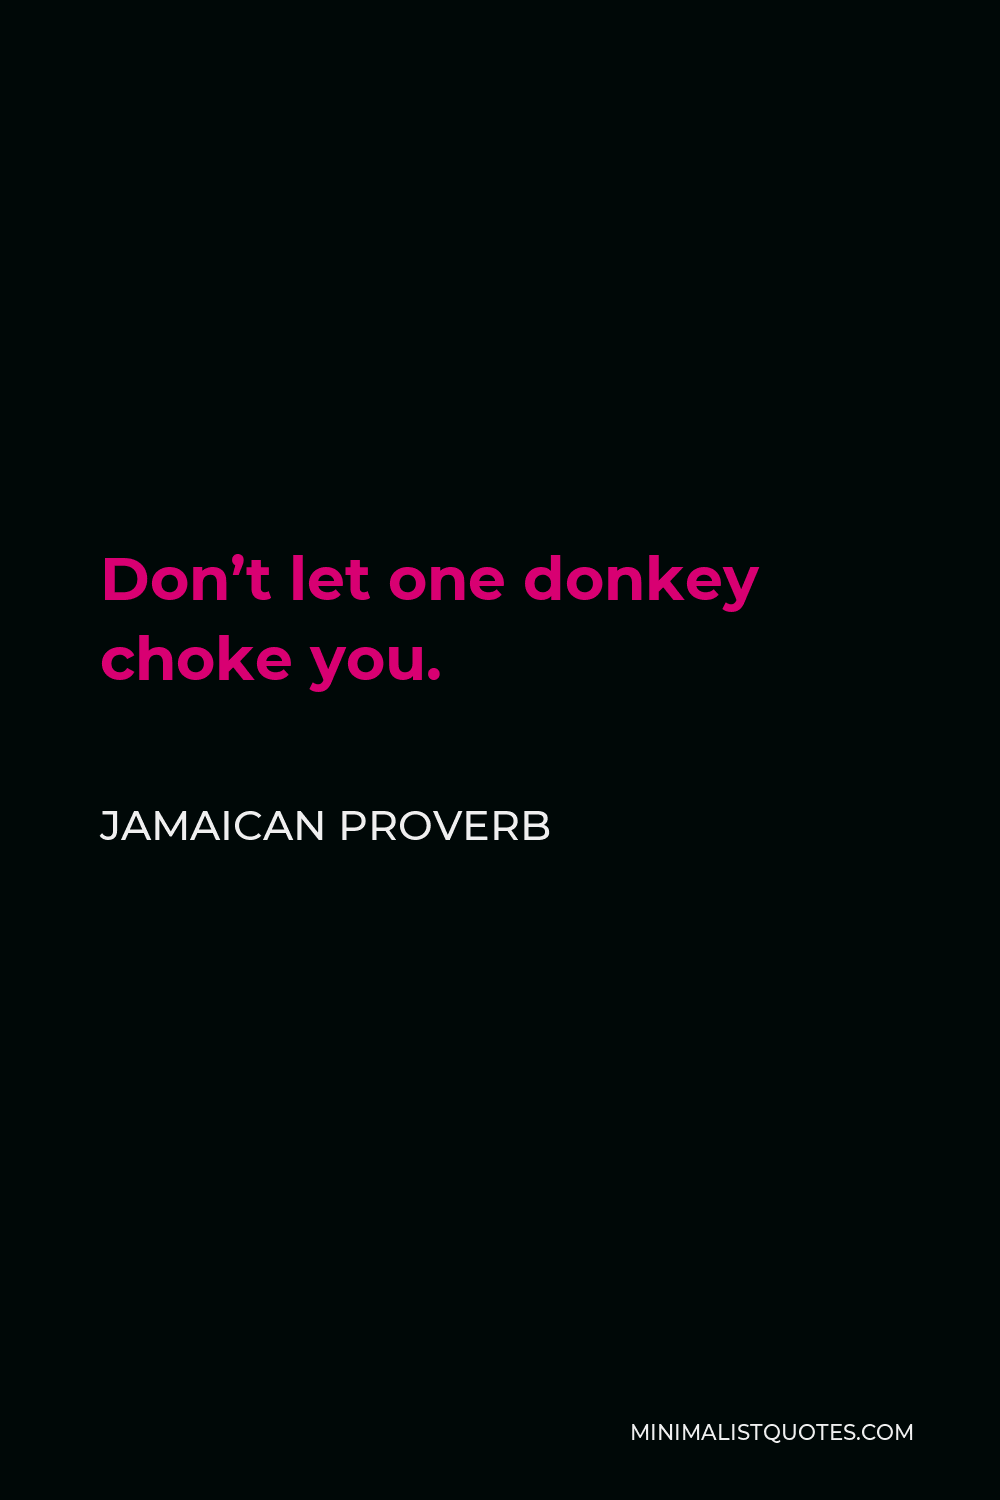 Jamaican Proverb Quote - Don’t let one donkey choke you.